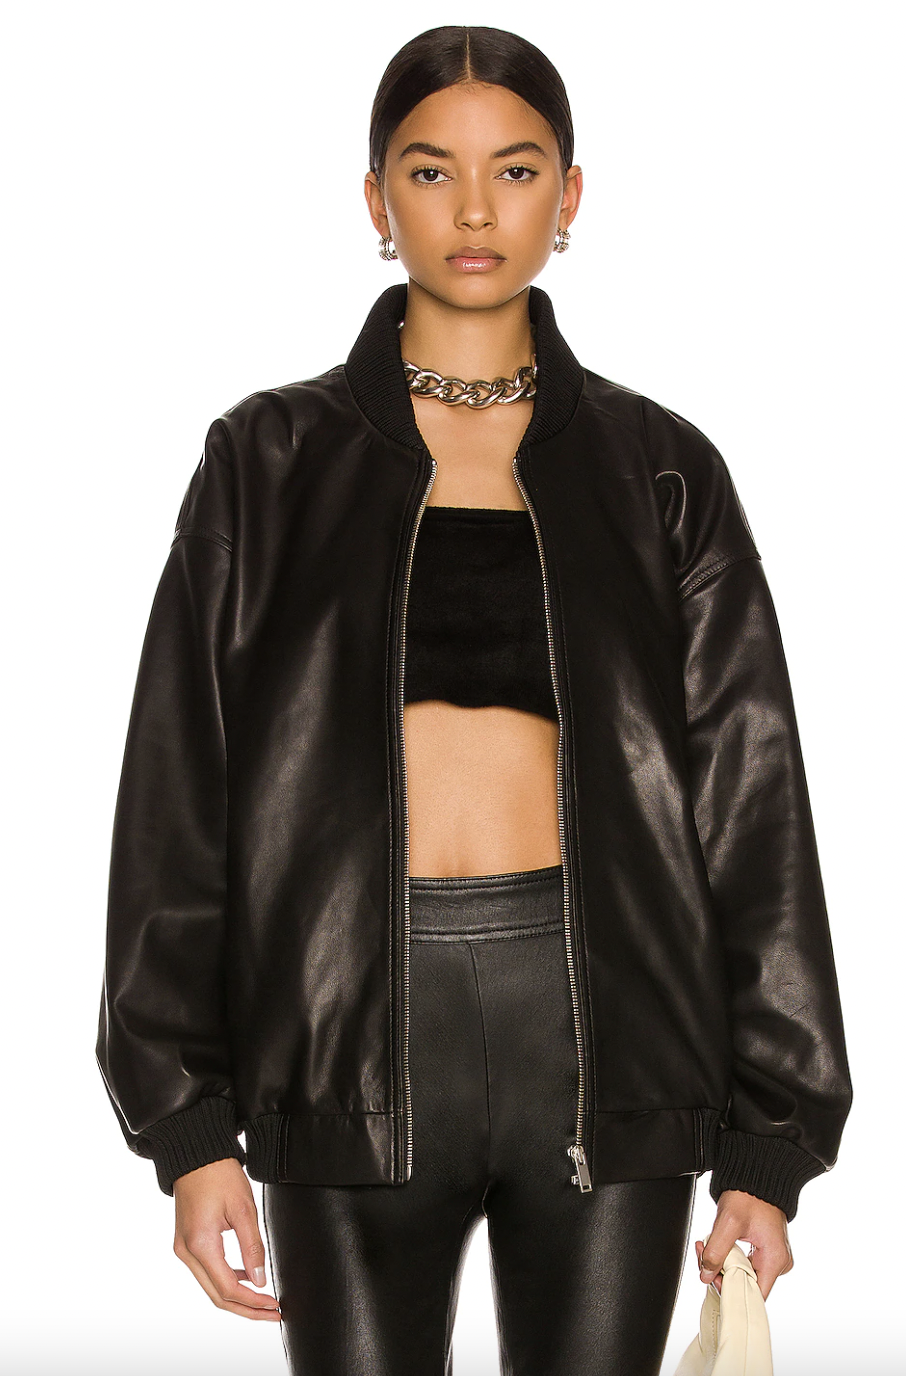 My Review of the Levi's Faux-Leather Bomber From Nordstrom | Who What Wear